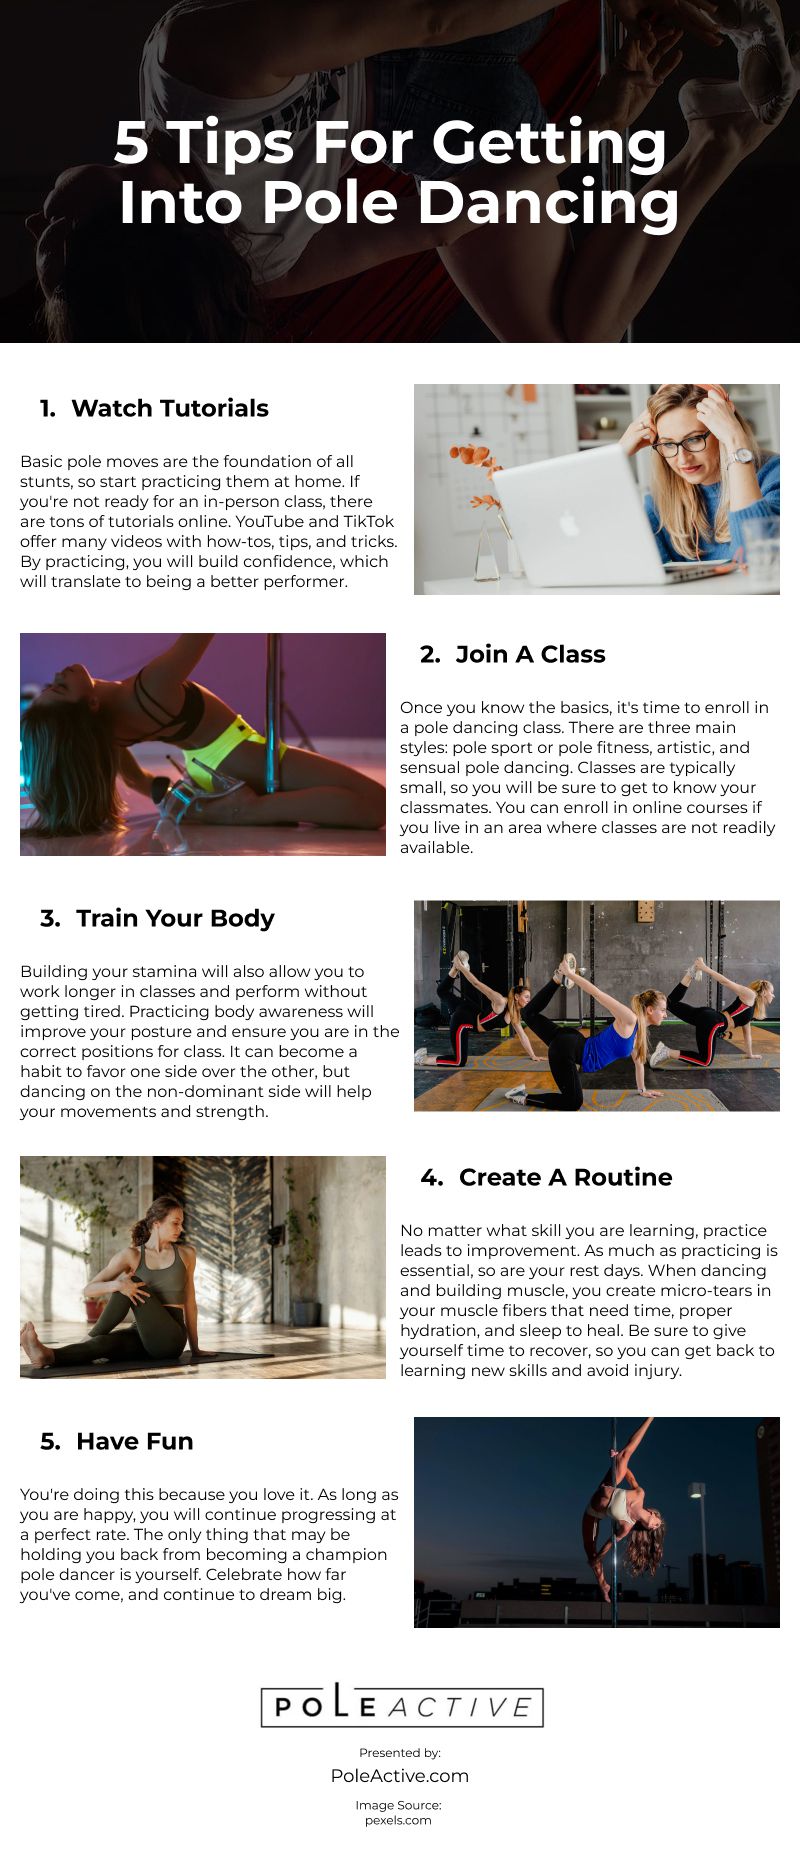 5 Tips For Getting Into Pole Dancing Infographic